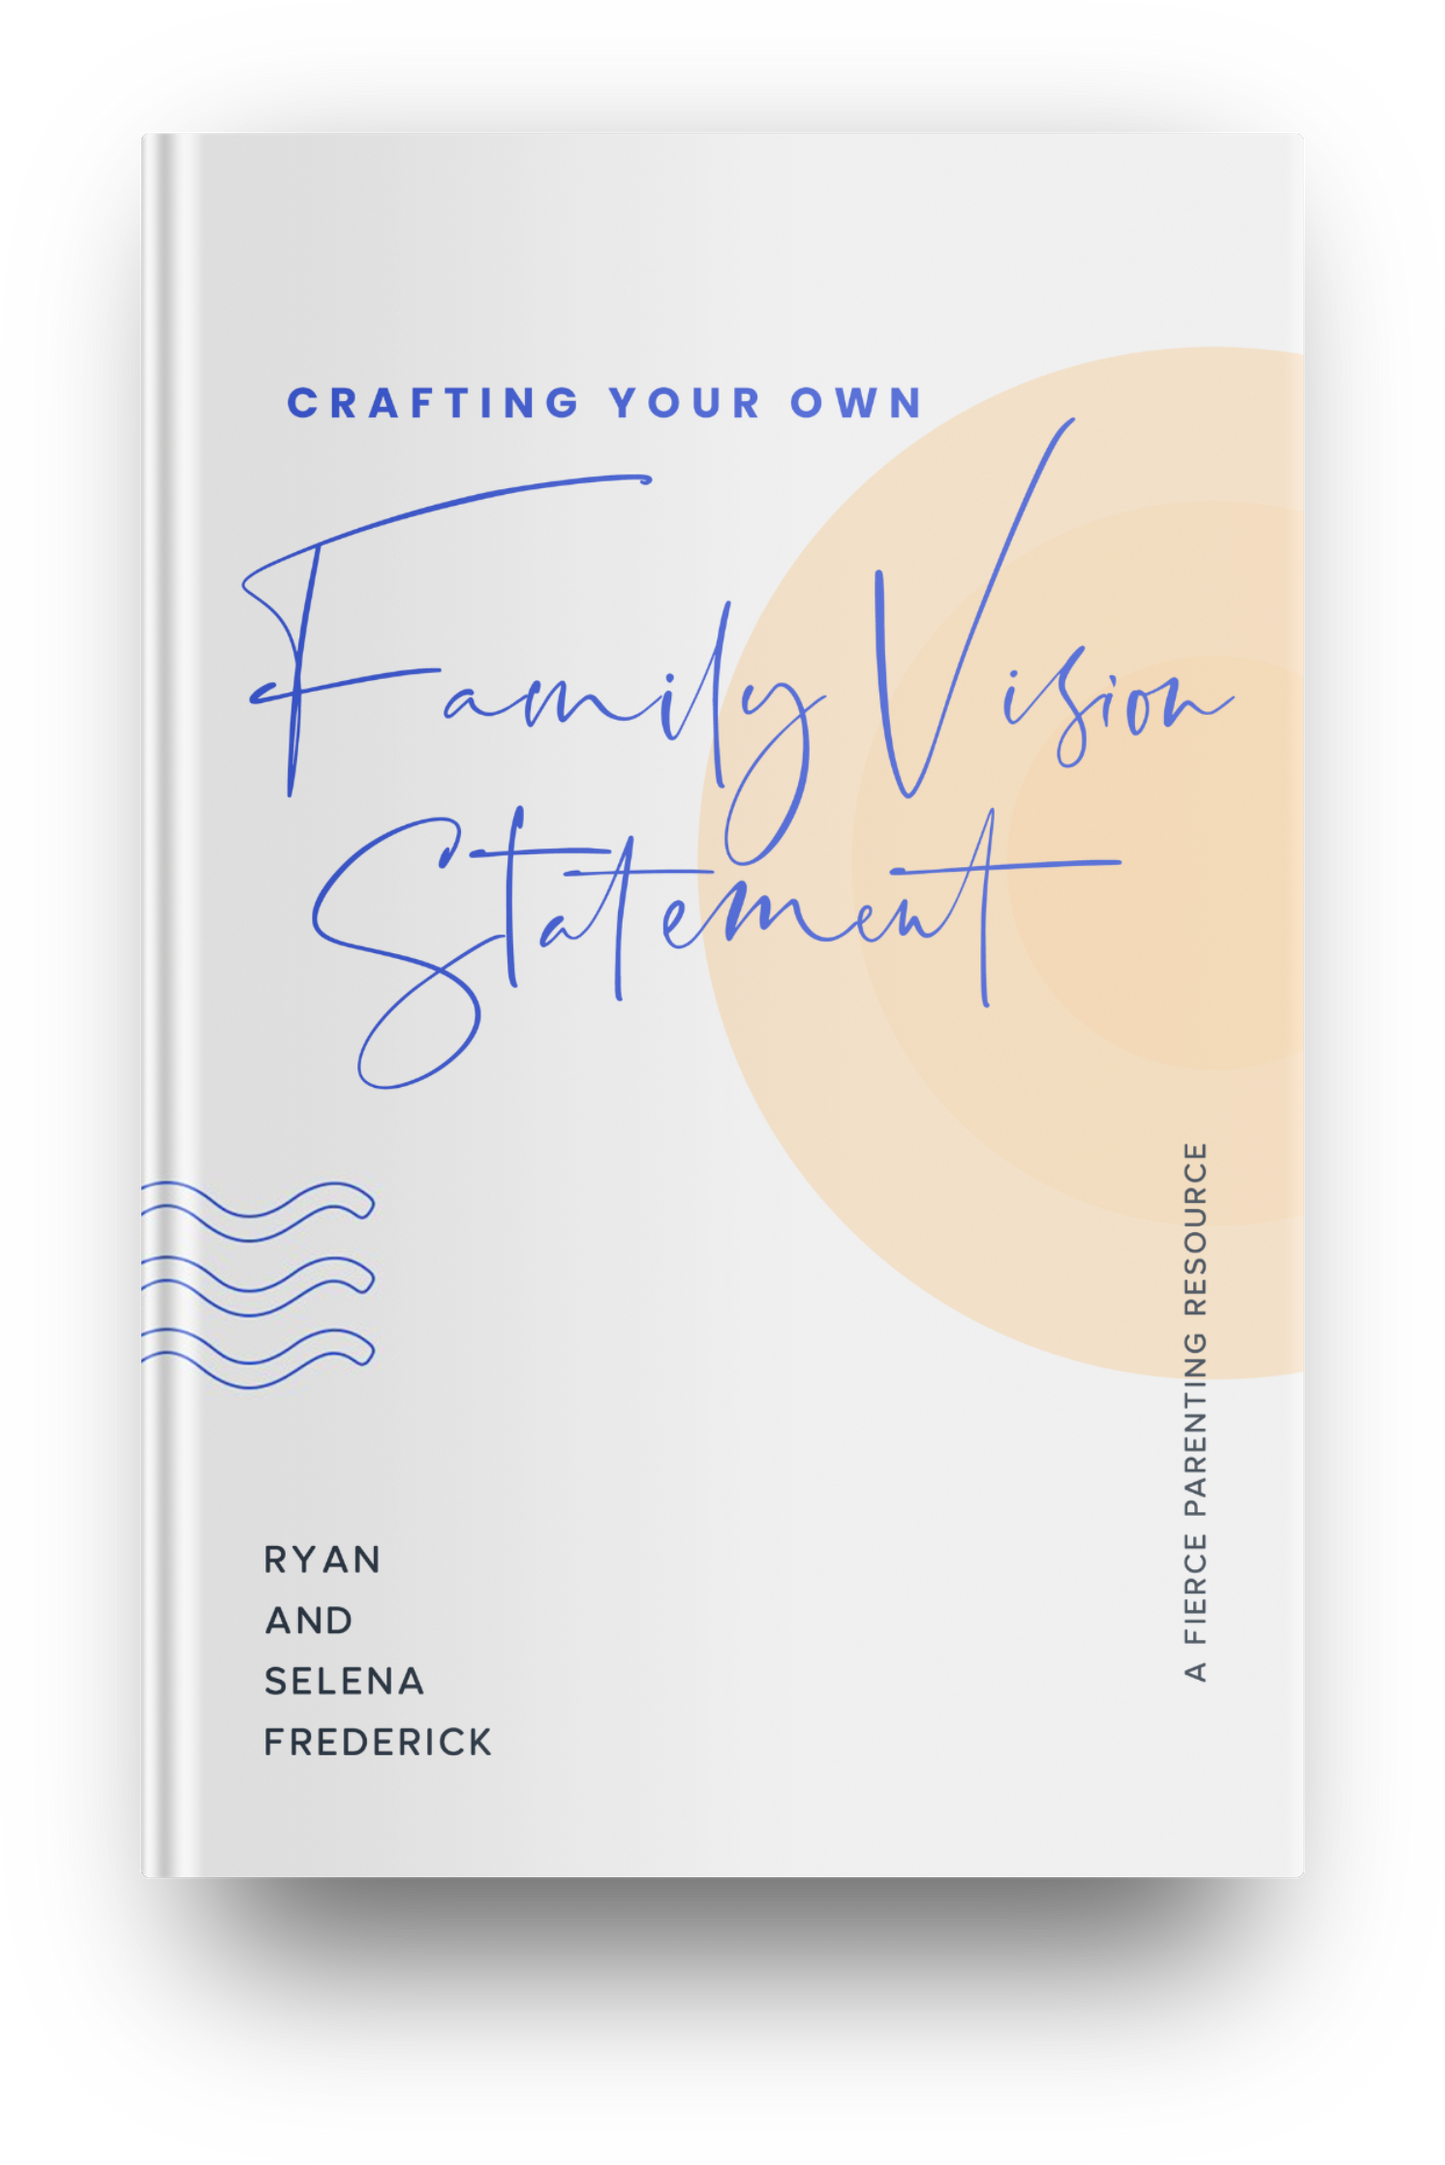 Crafting Your Own Family Vision Statement